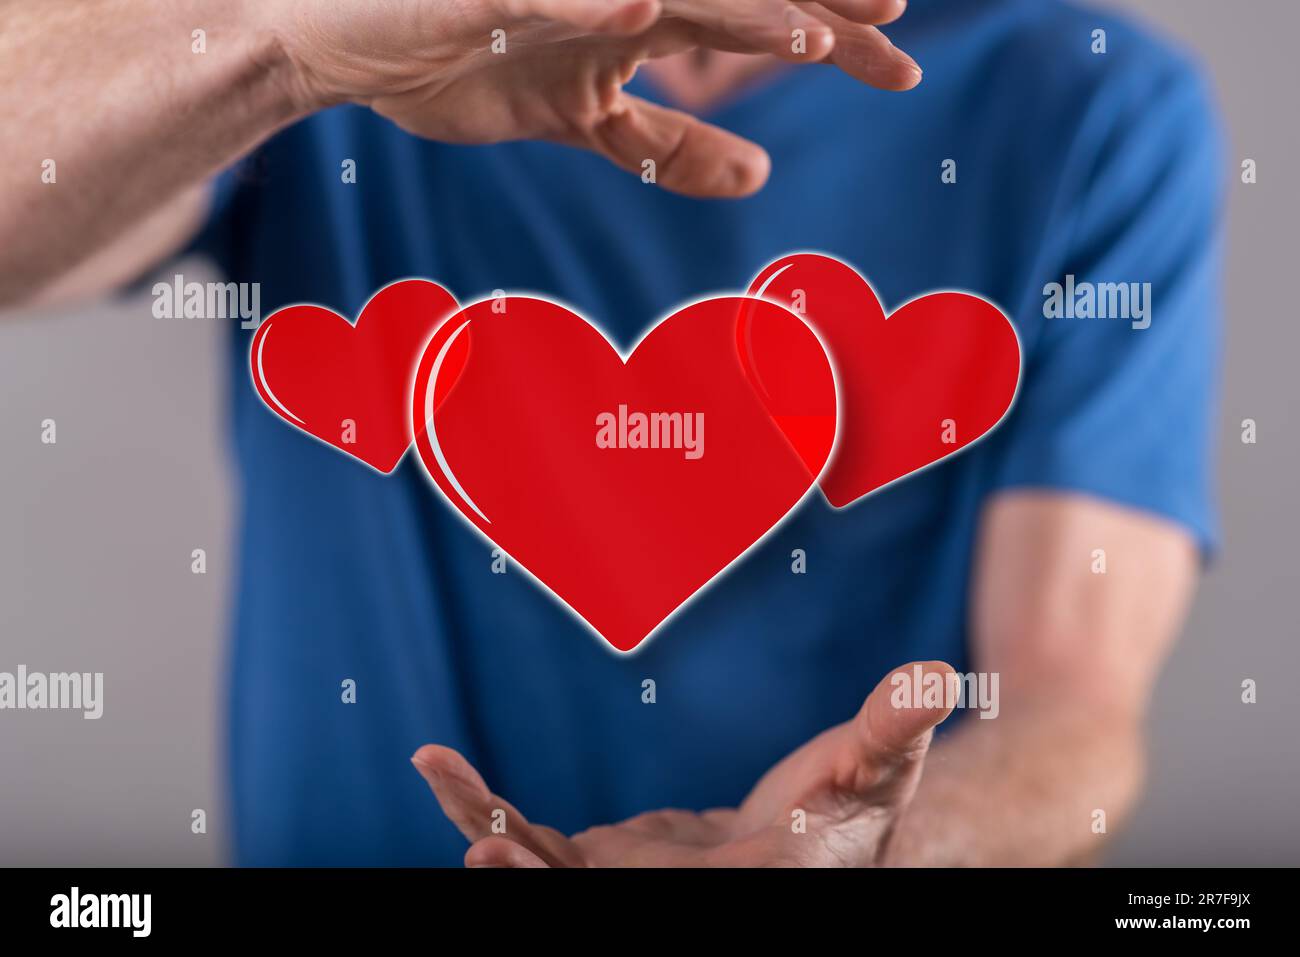 Love concept between hands of a man in background Stock Photo